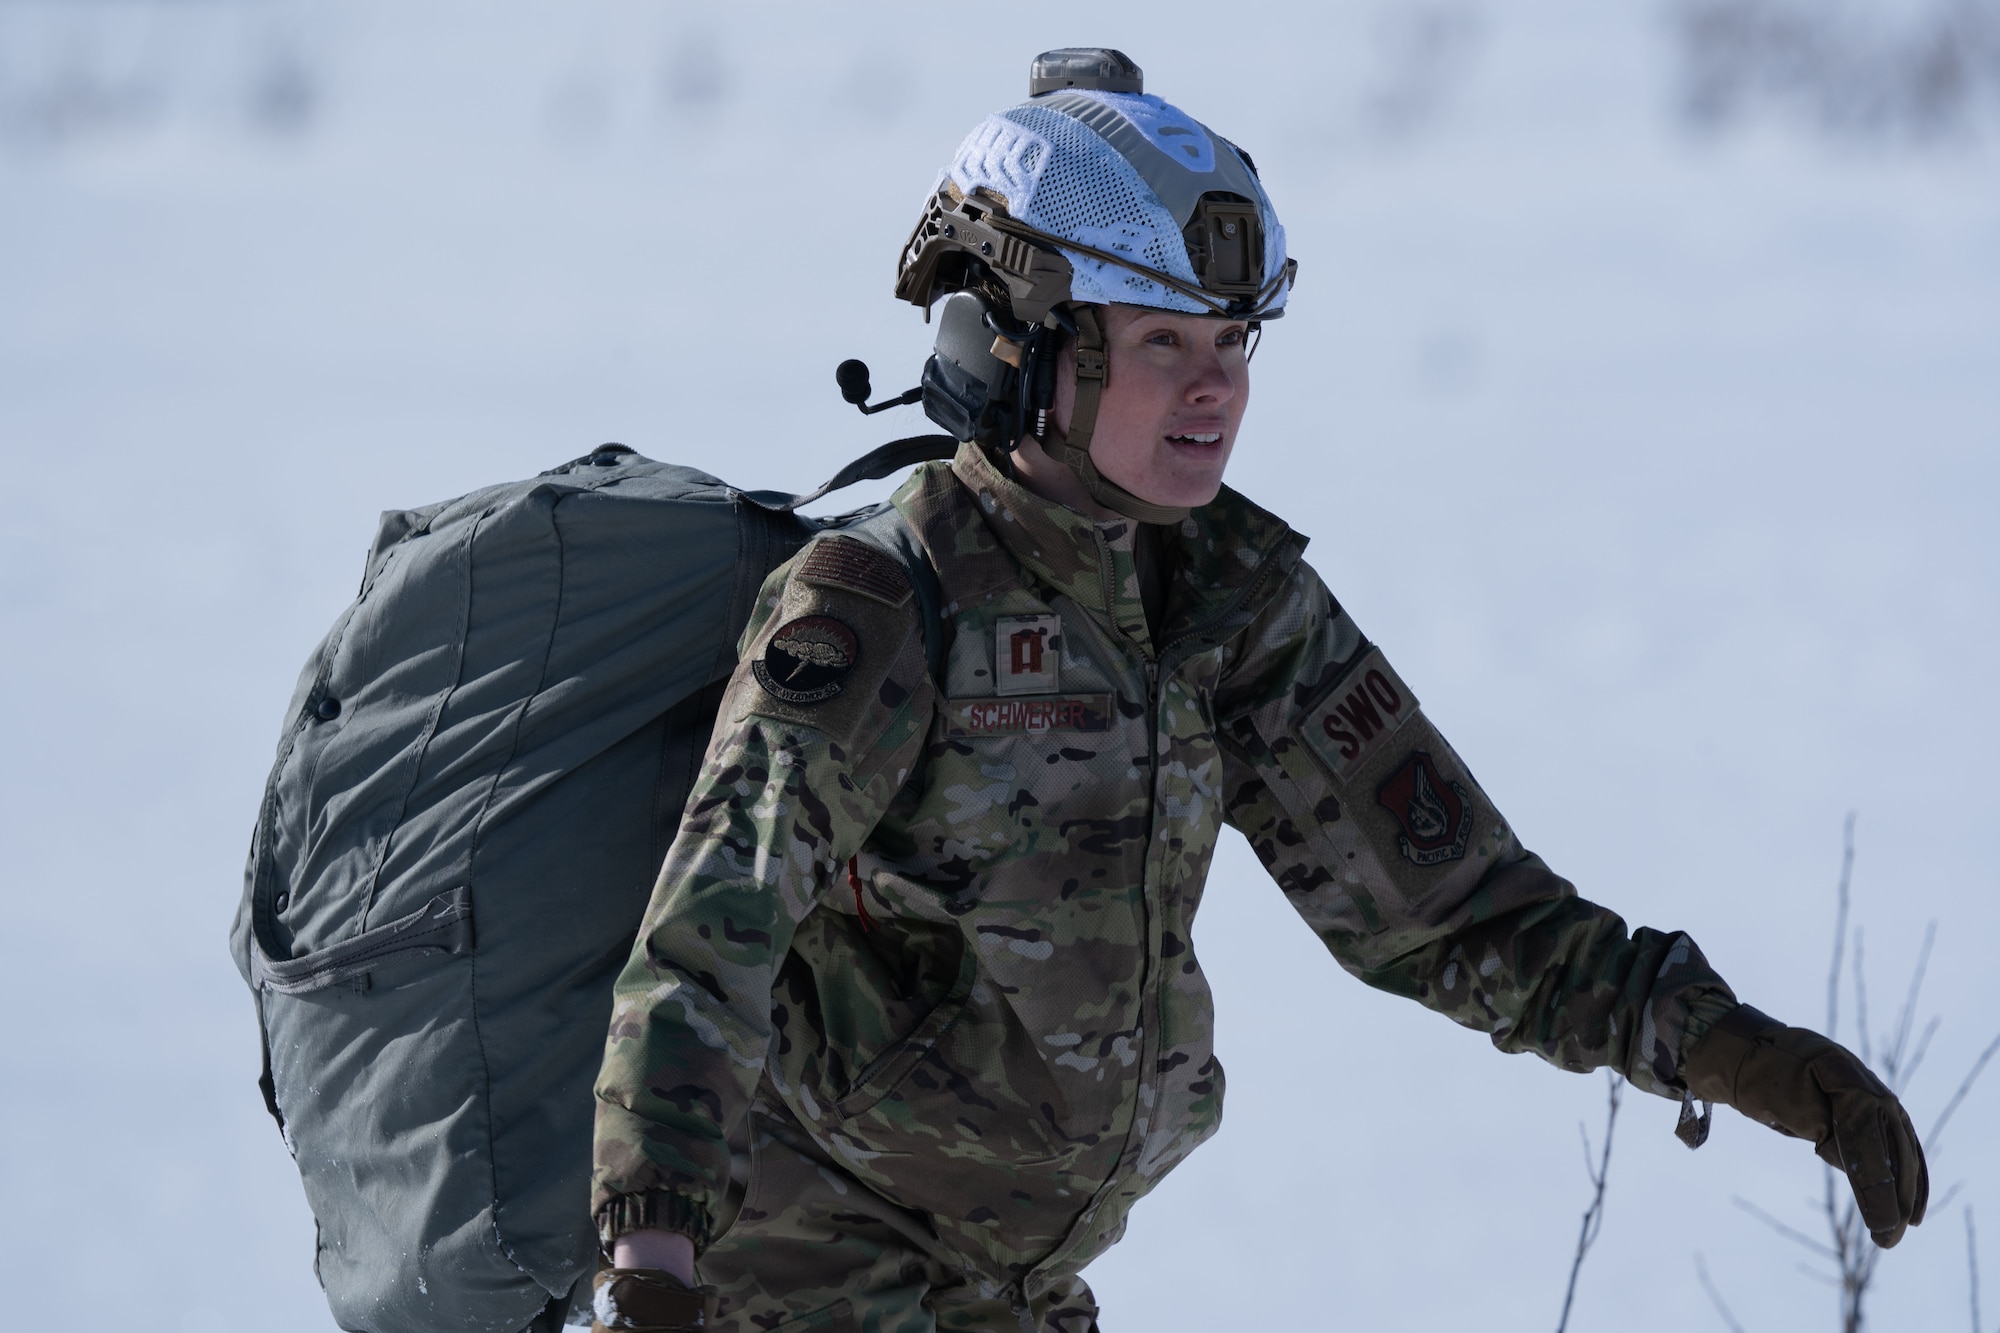 Photo of an Airman after a jump at Geronimo Drop Zone